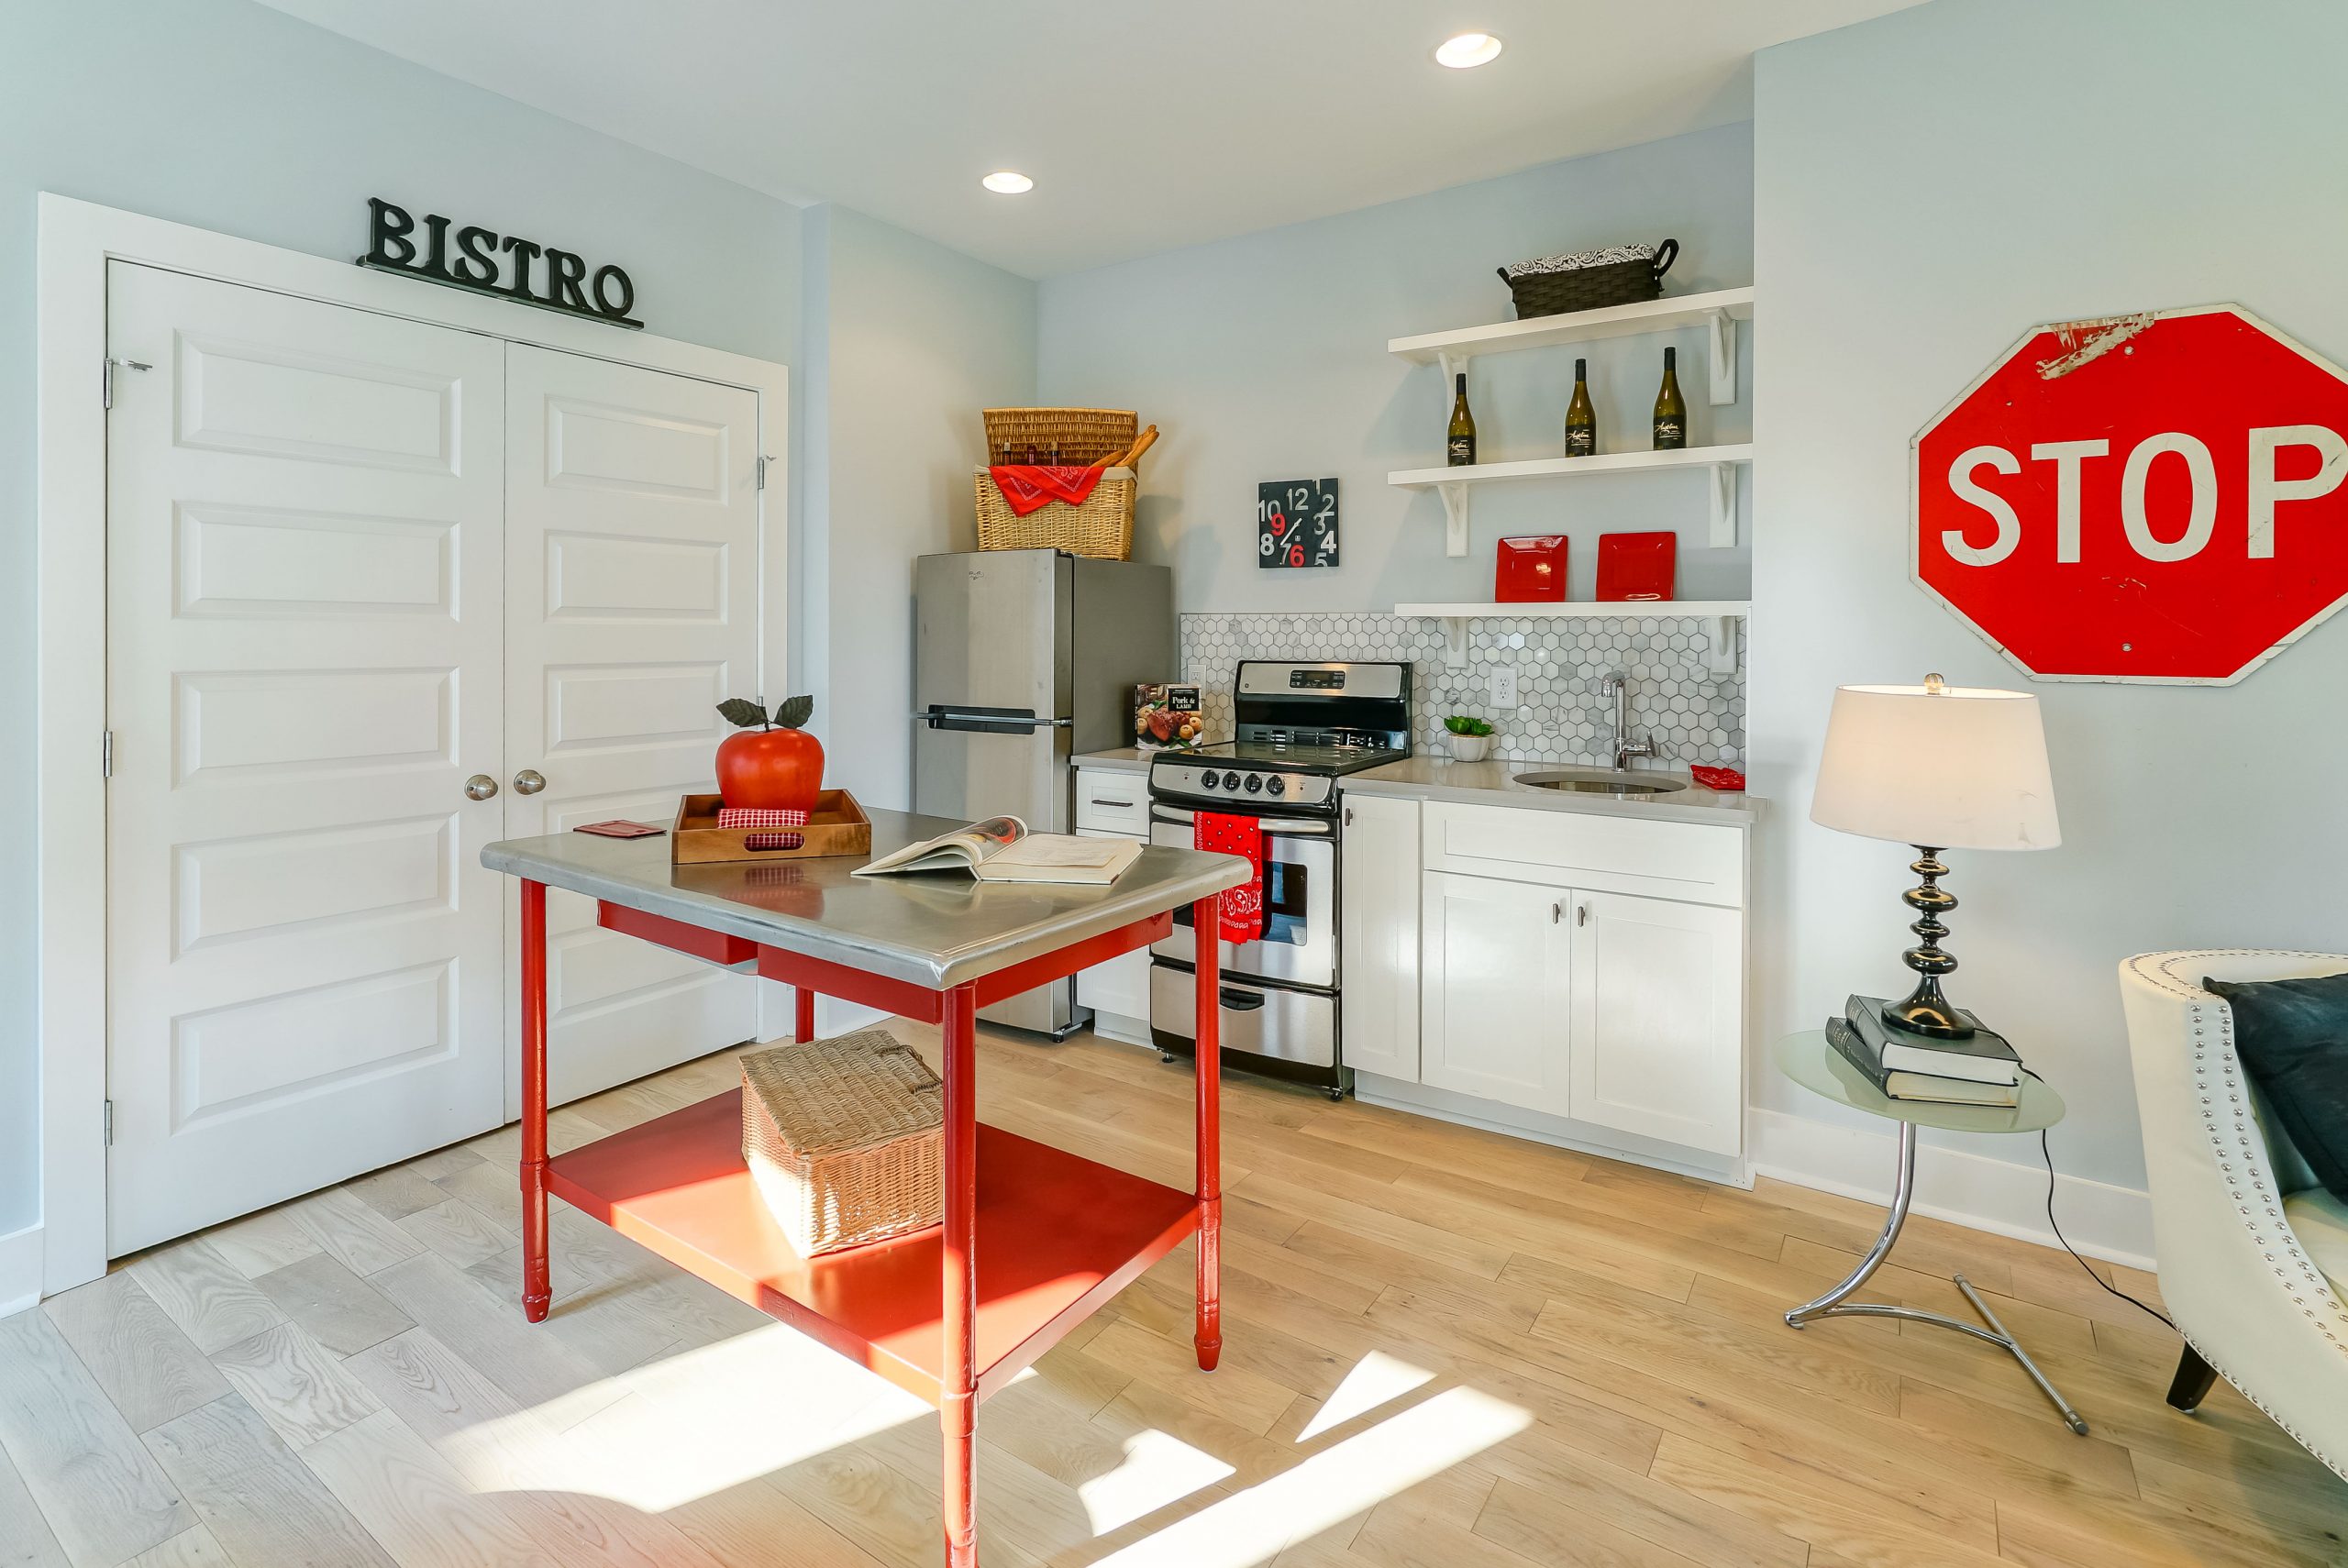 Kortney Wilson creates a modern-meets-vintage duplex with hits of red